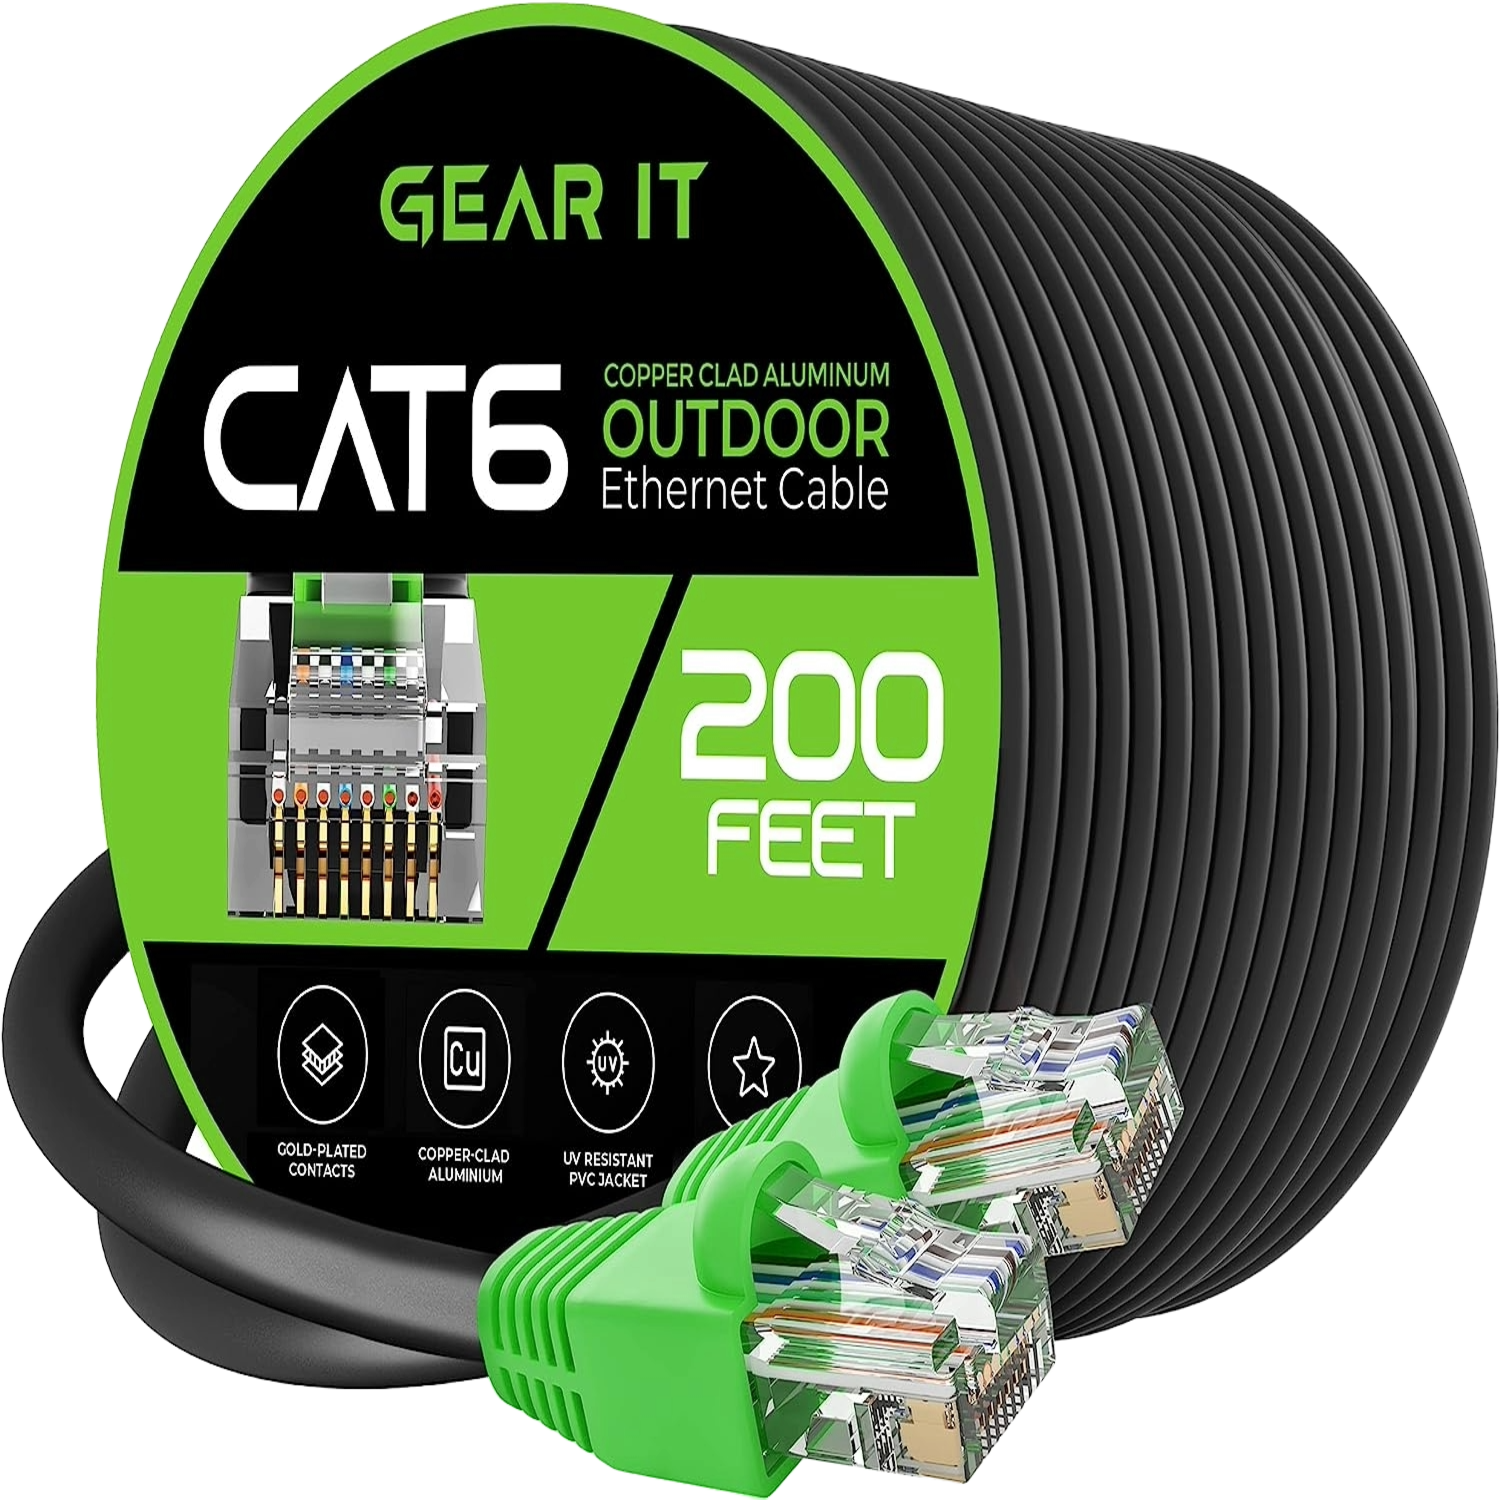 A render of the GearIT Cat6 outdoor Ethernet cable on a transparent background.